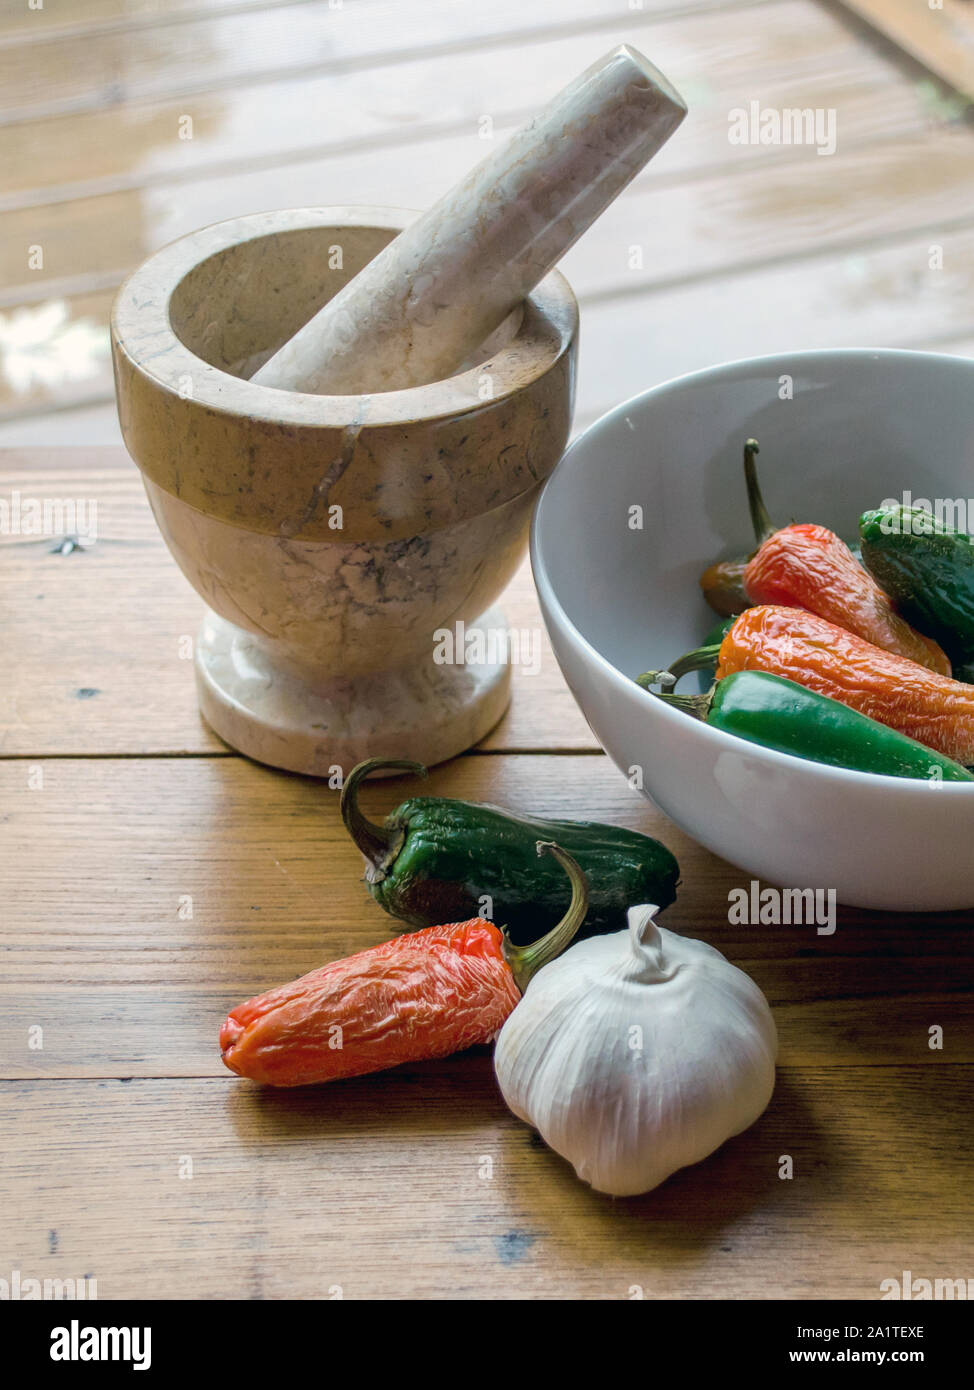 https://c8.alamy.com/comp/2A1TEXE/still-life-of-a-pestle-and-grinder-with-a-bowl-of-red-and-green-peppers-and-a-large-clove-of-garlic-2A1TEXE.jpg